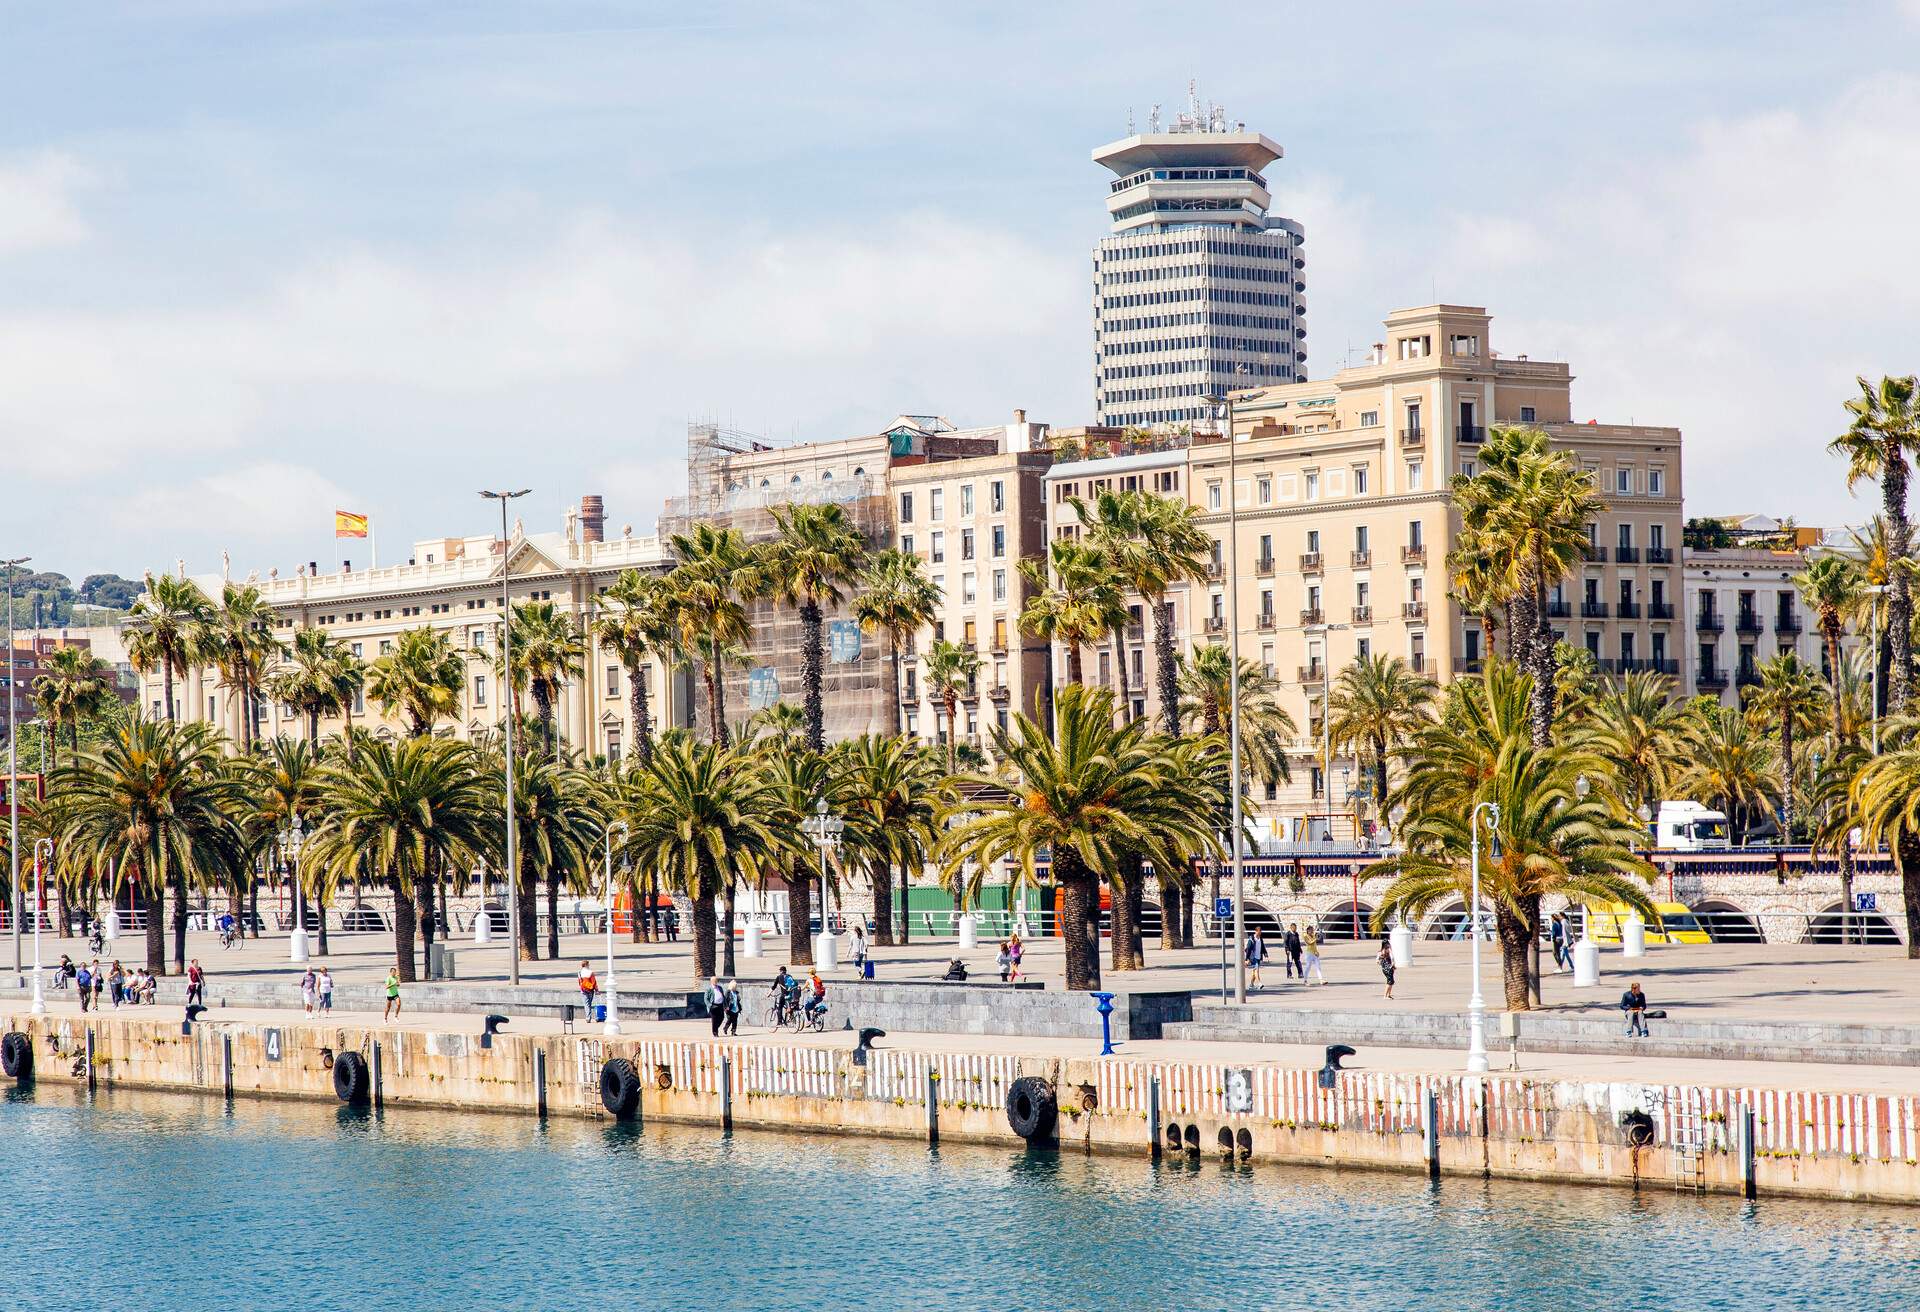 DEST_SPAIN_BARCELONA_PORT VELL WATERFRONT_GettyImages-841247226